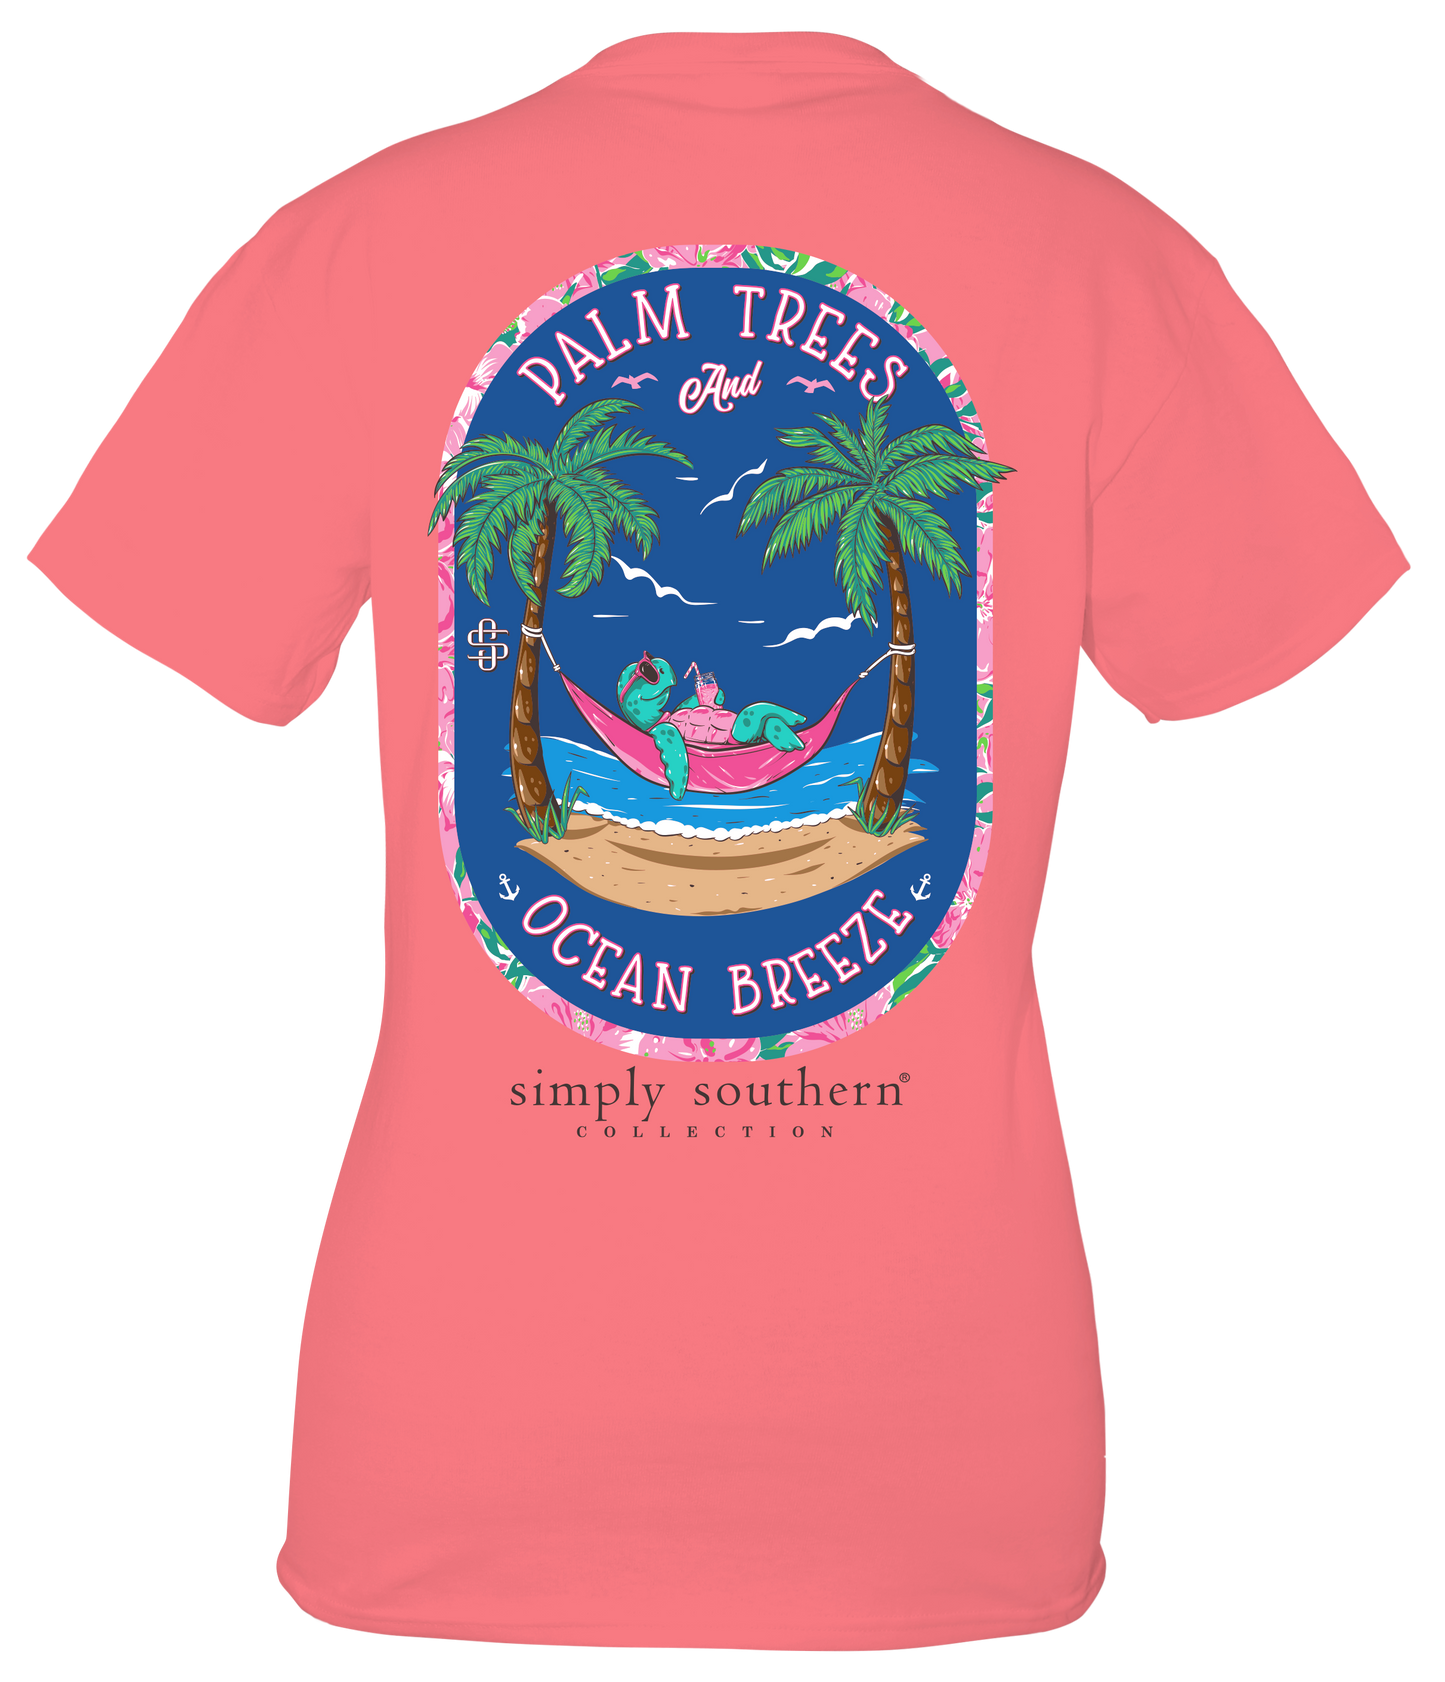 "Palm Trees and Ocean Breeze" Shirt